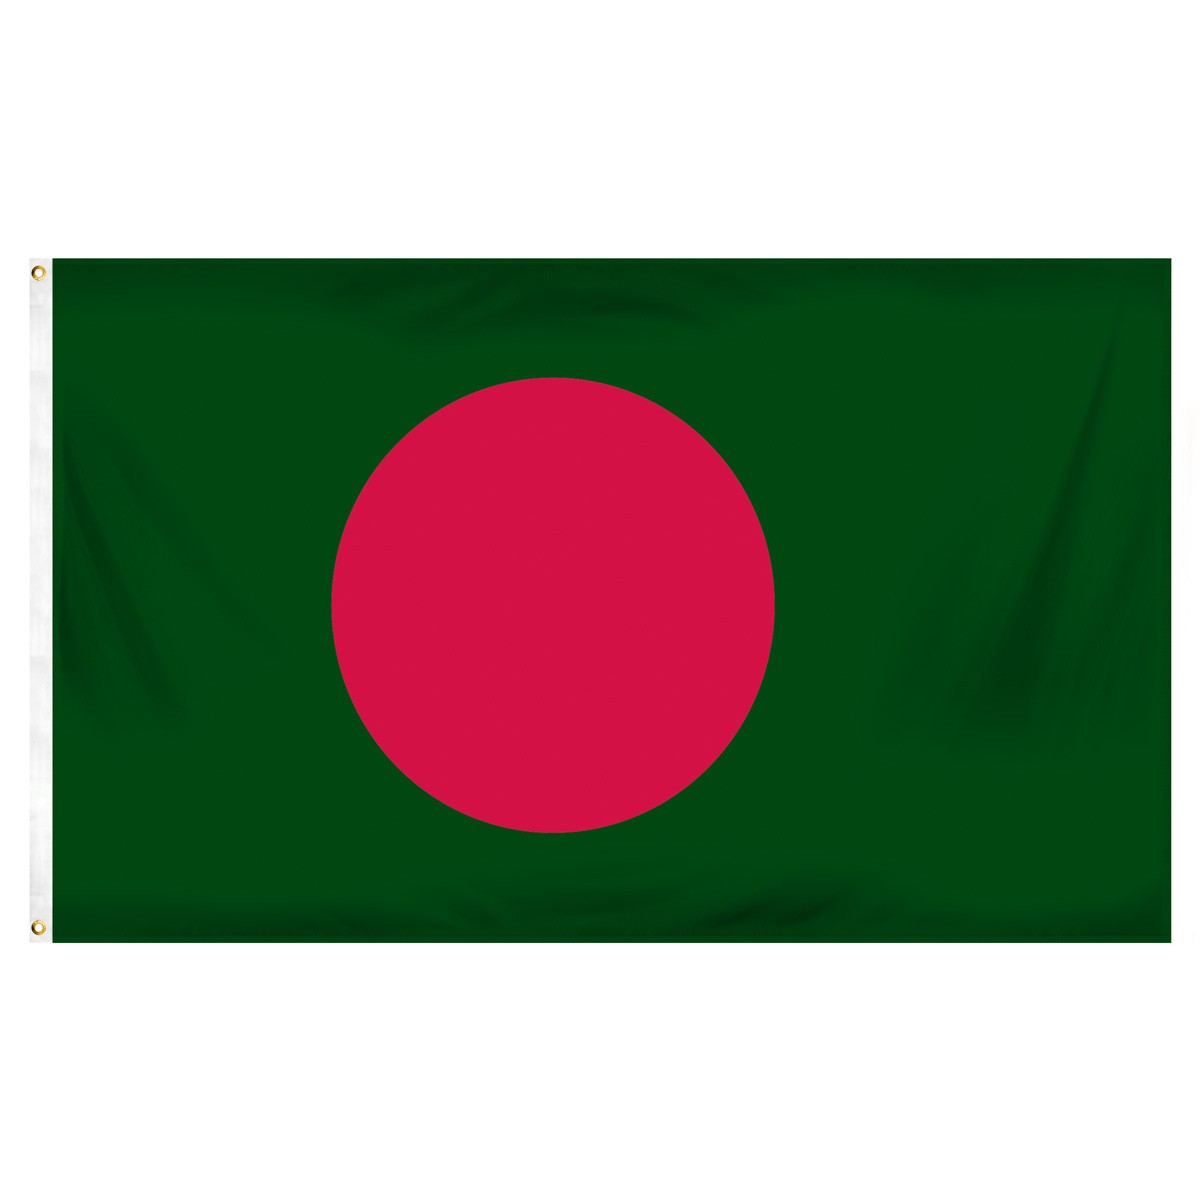 Bangladesh Submit Flags and Flags